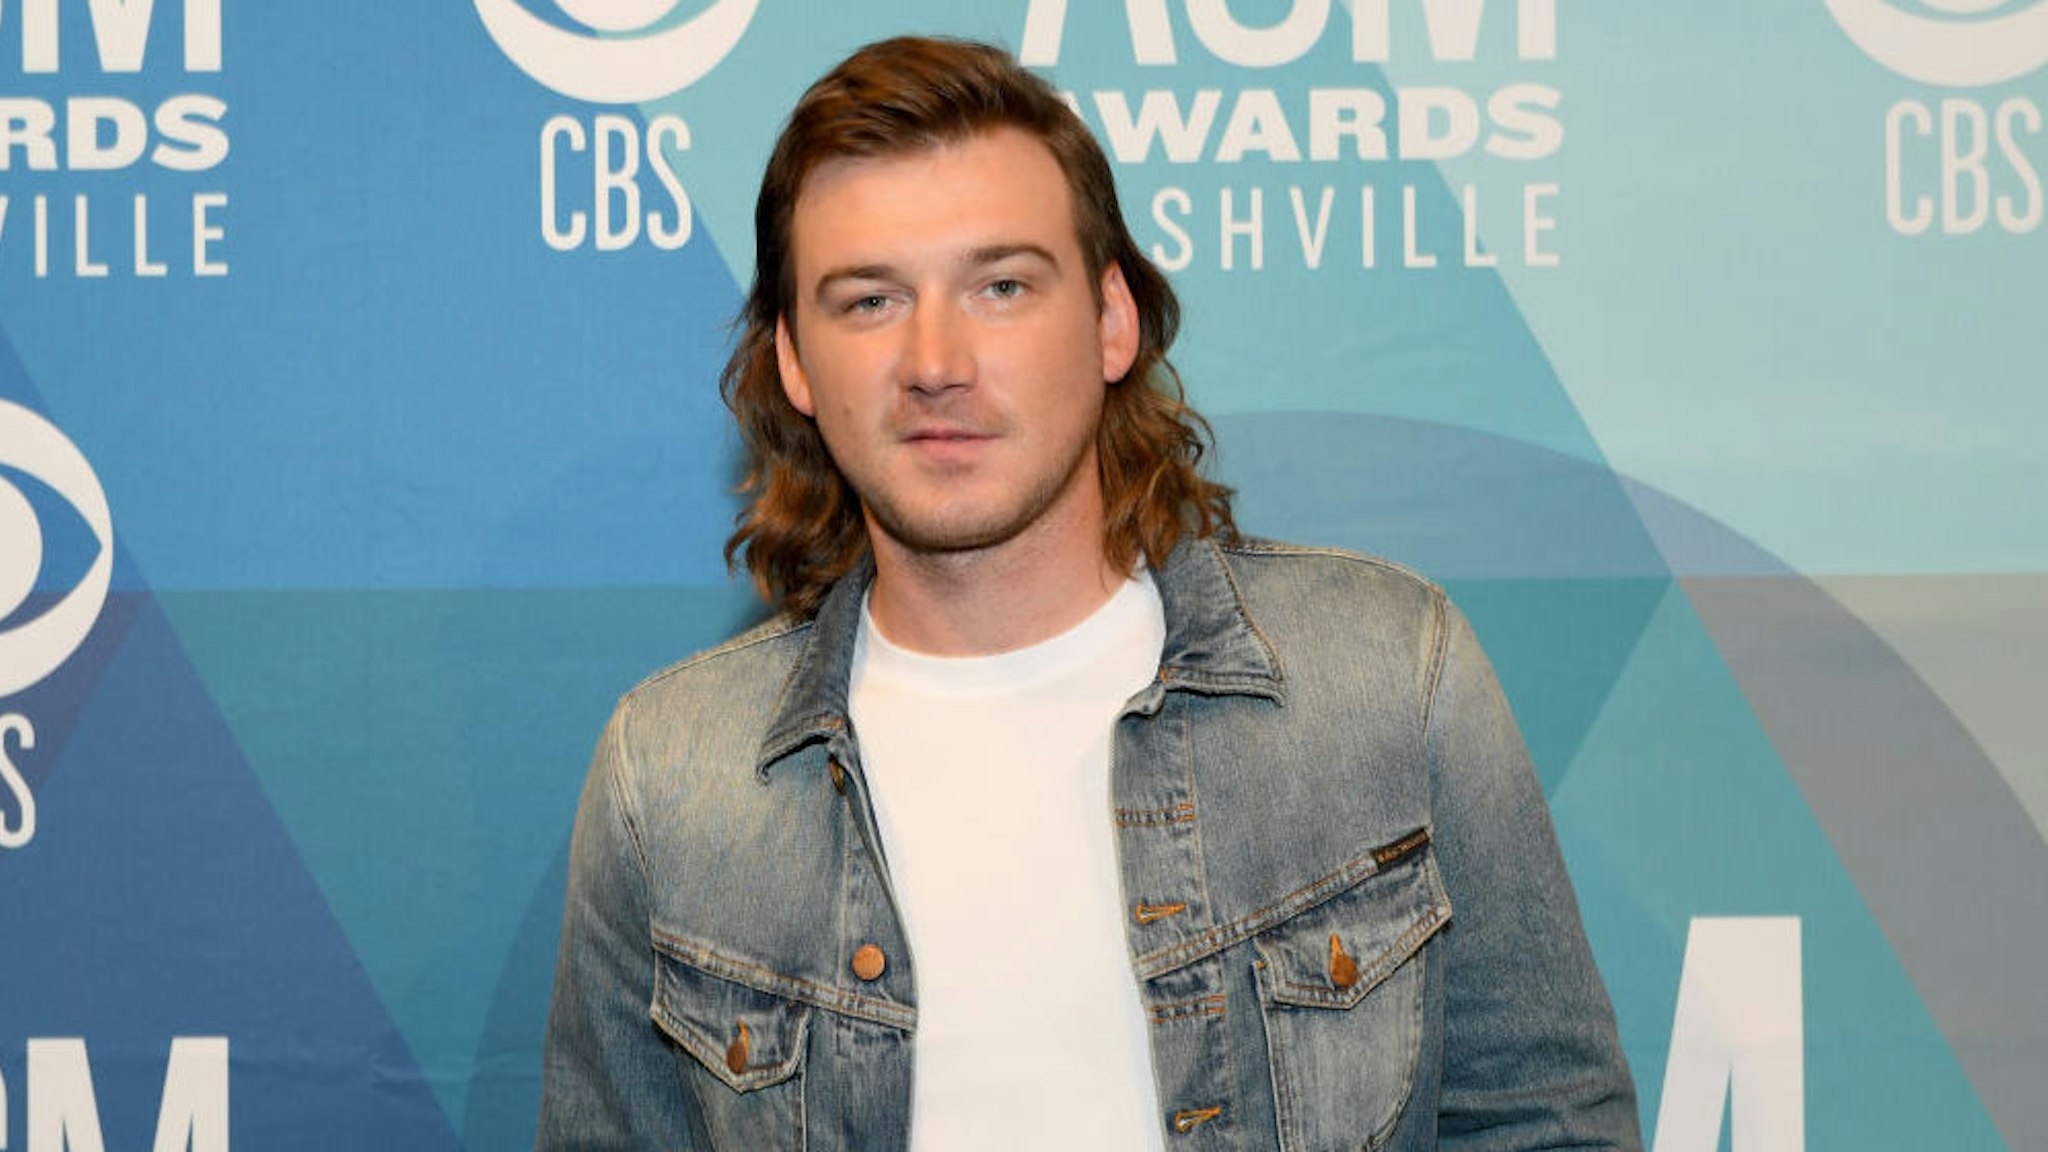 Morgan Wallen attends the 55th Academy of Country Music Awards at the Grand Ole Opry on September 13, 2020 in Nashville, Tennessee.